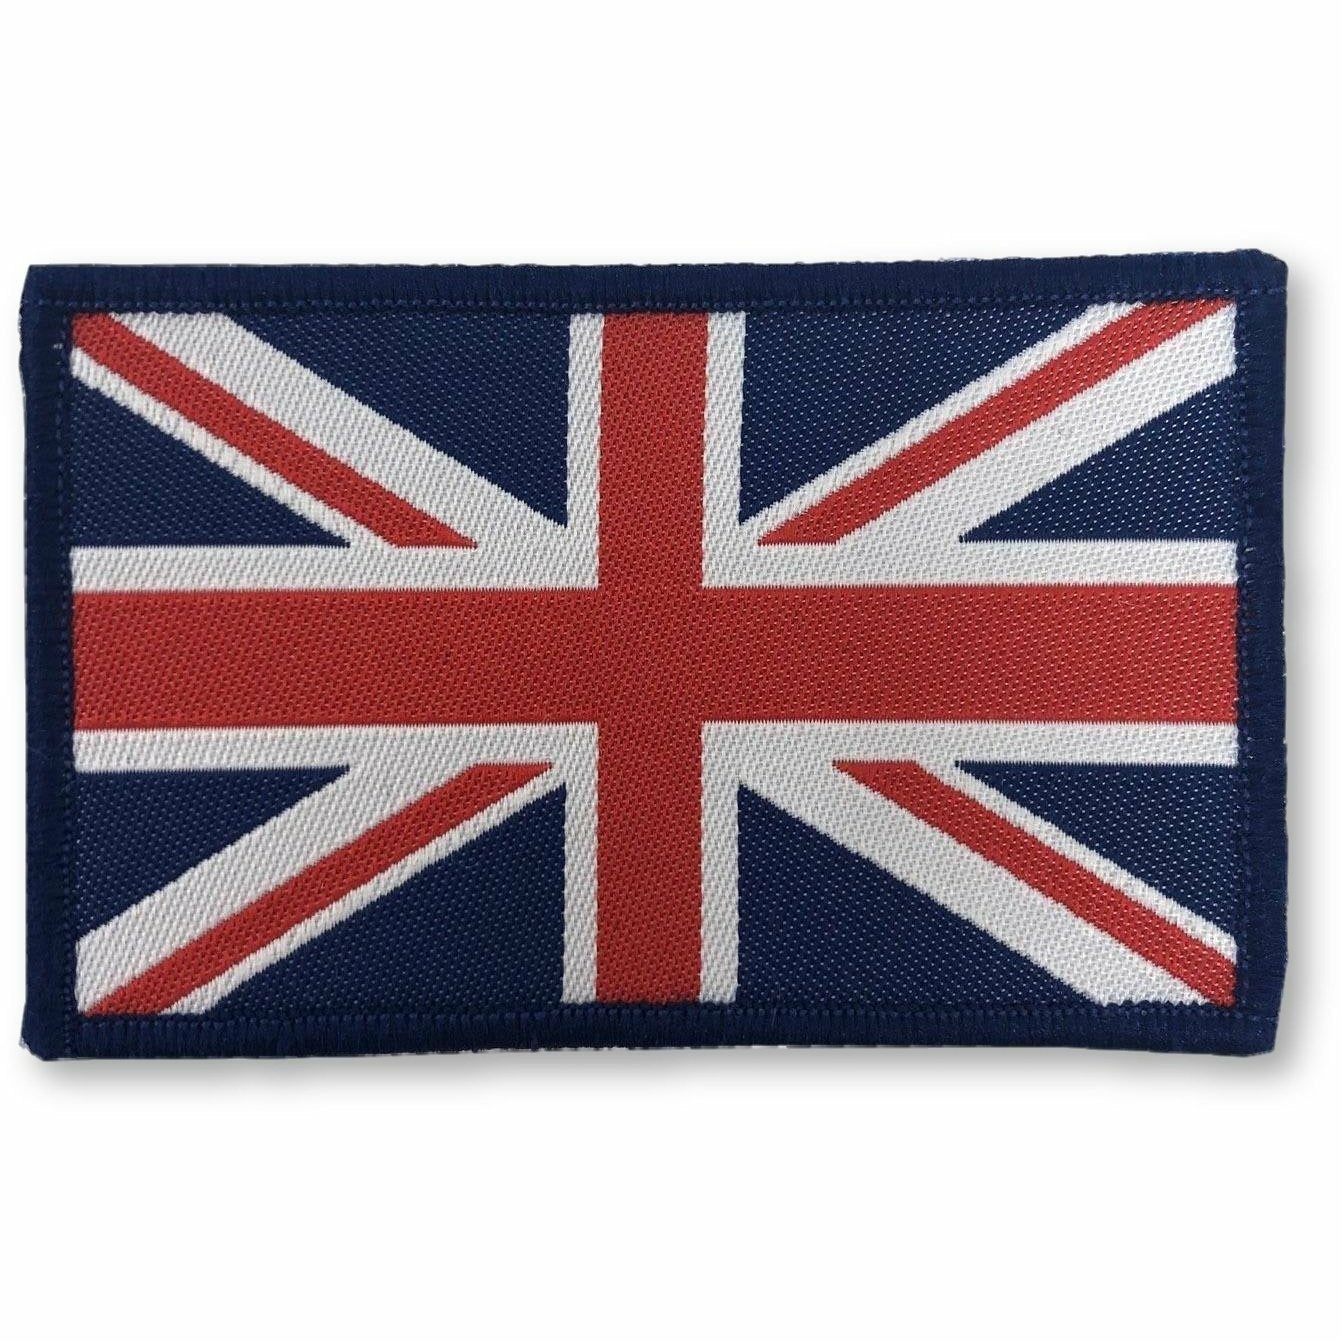 Peluche Union Jack Golden, Red And Navy Blue Colored Lapel Pin For Men